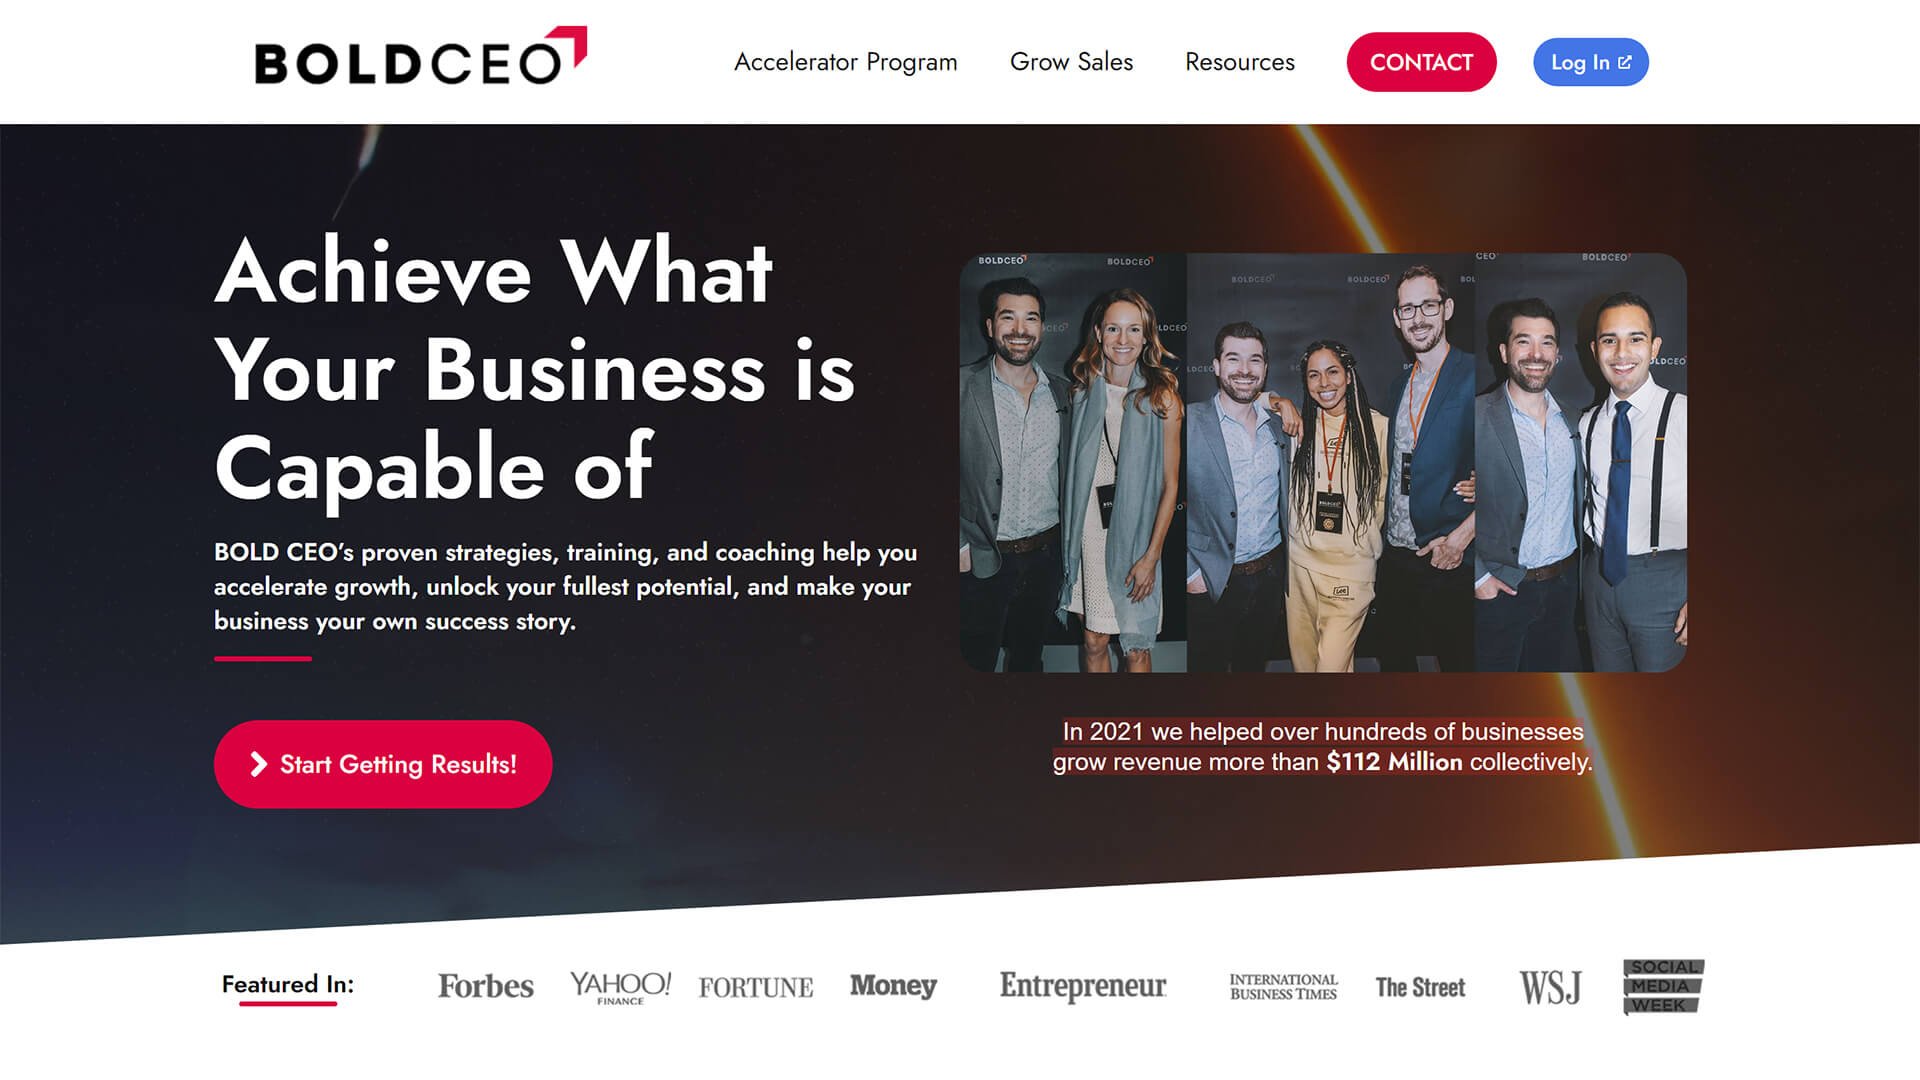 The beautiful bold.ceo website created with Act3 on the HubSpot CMS